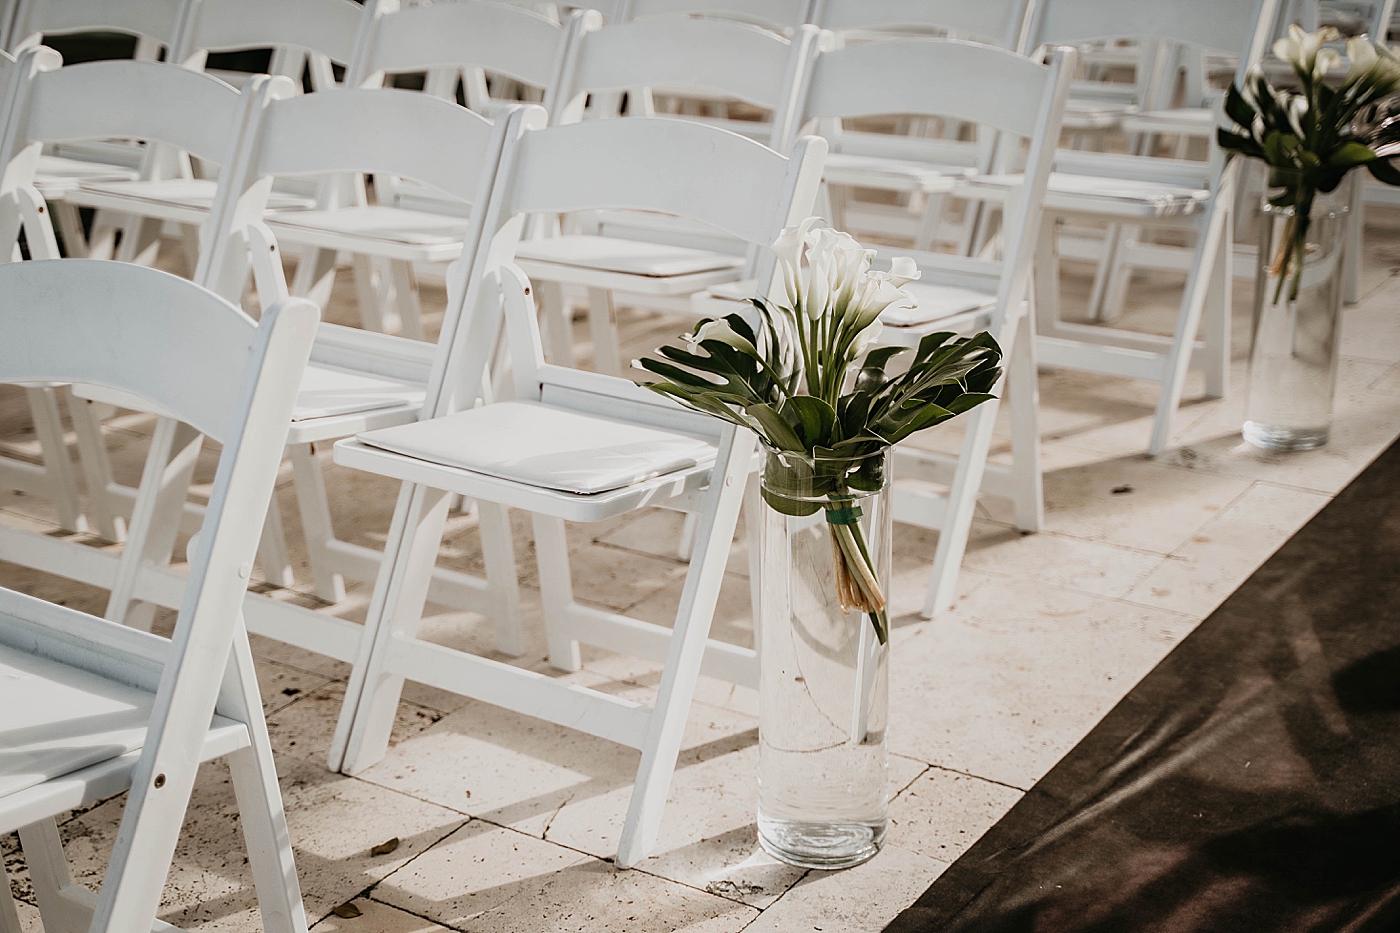 Ceremony white folding chairs detail shot Waterstone Resort and Marina Wedding captured by South Florida Wedding Photographer Krystal Capone Photography